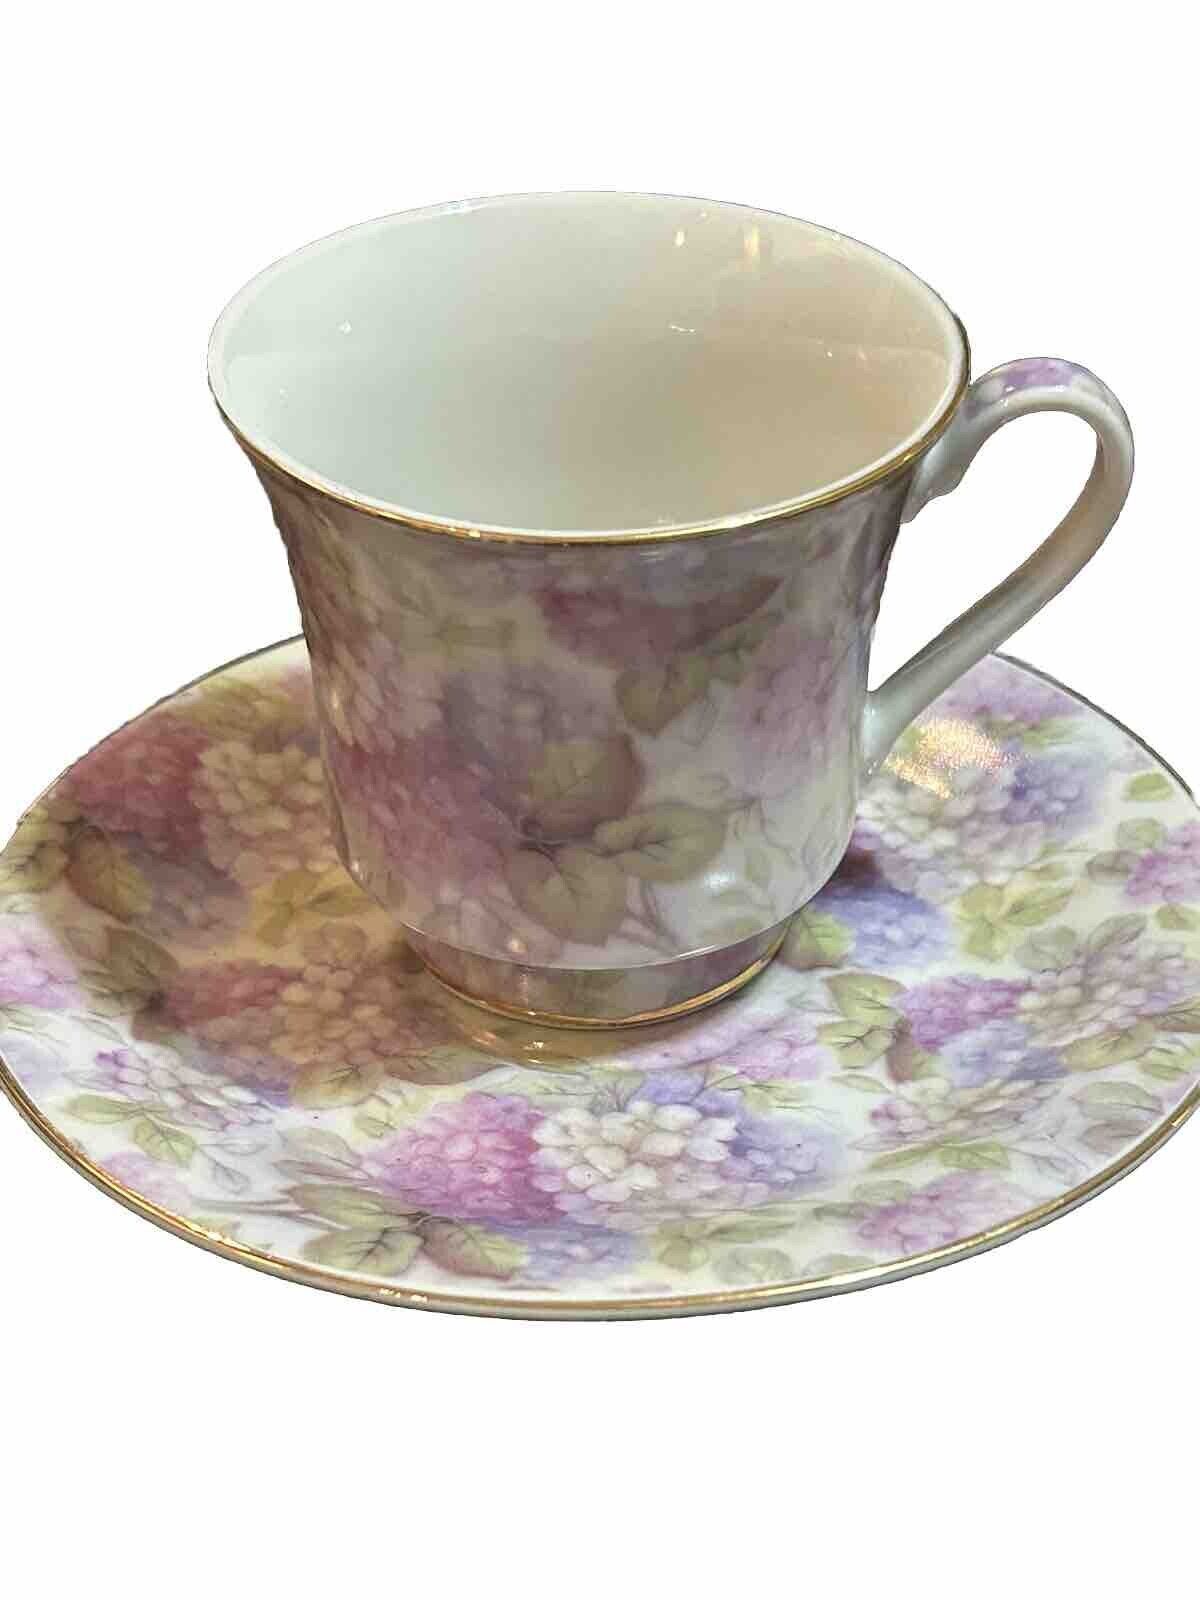 Darice Tea Cup And Saucer  With Purple Wild Roses